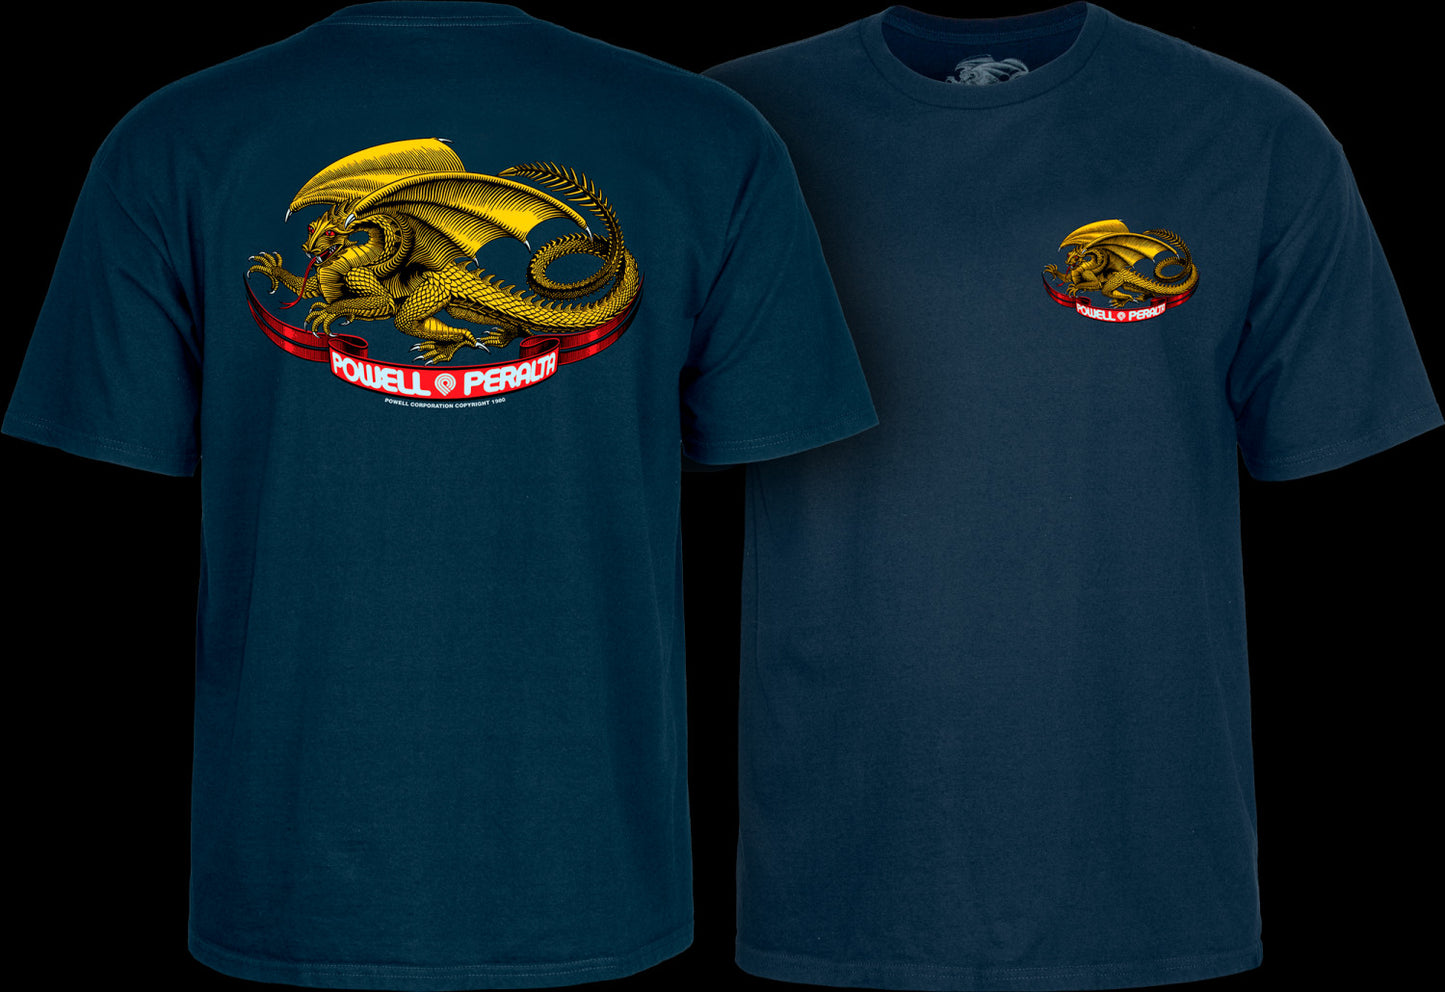 POWELL PERALTA - YOUTH PP OVAL DRAGON TEE - NAVY